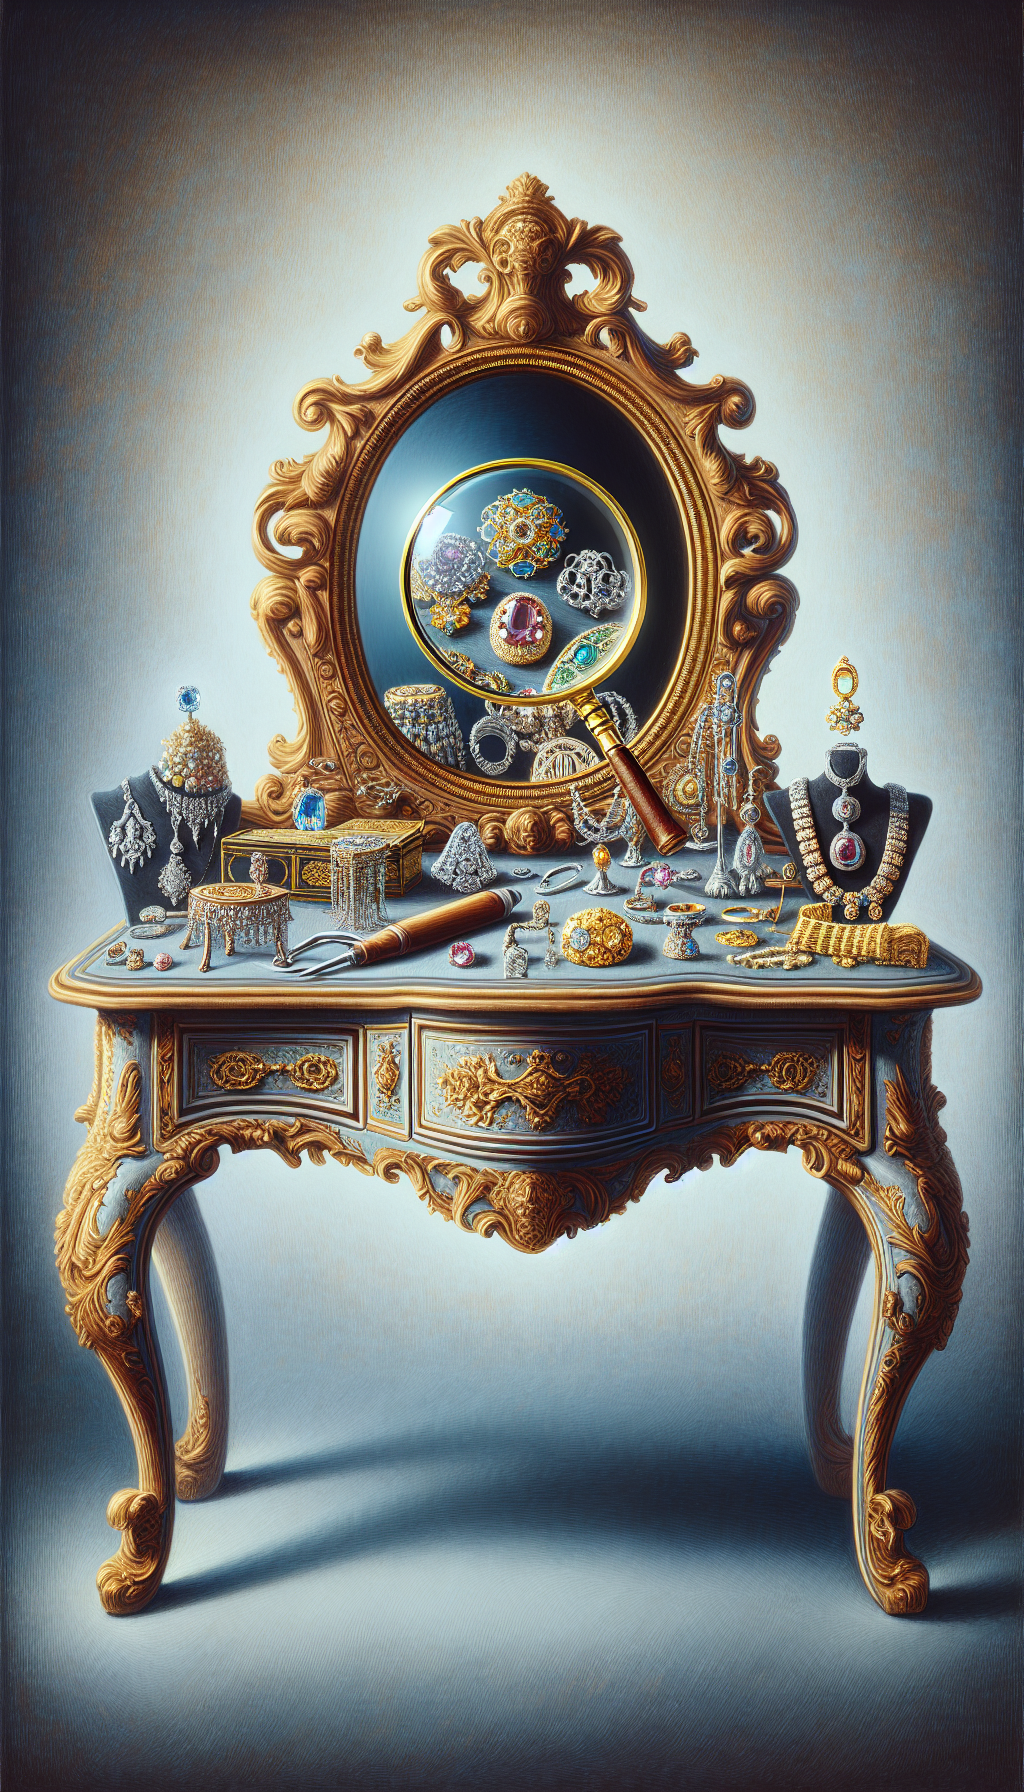 An illustration depicts a beautifully detailed antique vanity with an ornate mirror reflecting a variety of heirloom jewelry. A magnifying glass hovers over the items with a visible expert eye peering through, signifying professional appraisal. The style veers from realistic details on the vanity to impressionistic reflections in the mirror, emphasizing the blend of tangible value and expert interpretation.